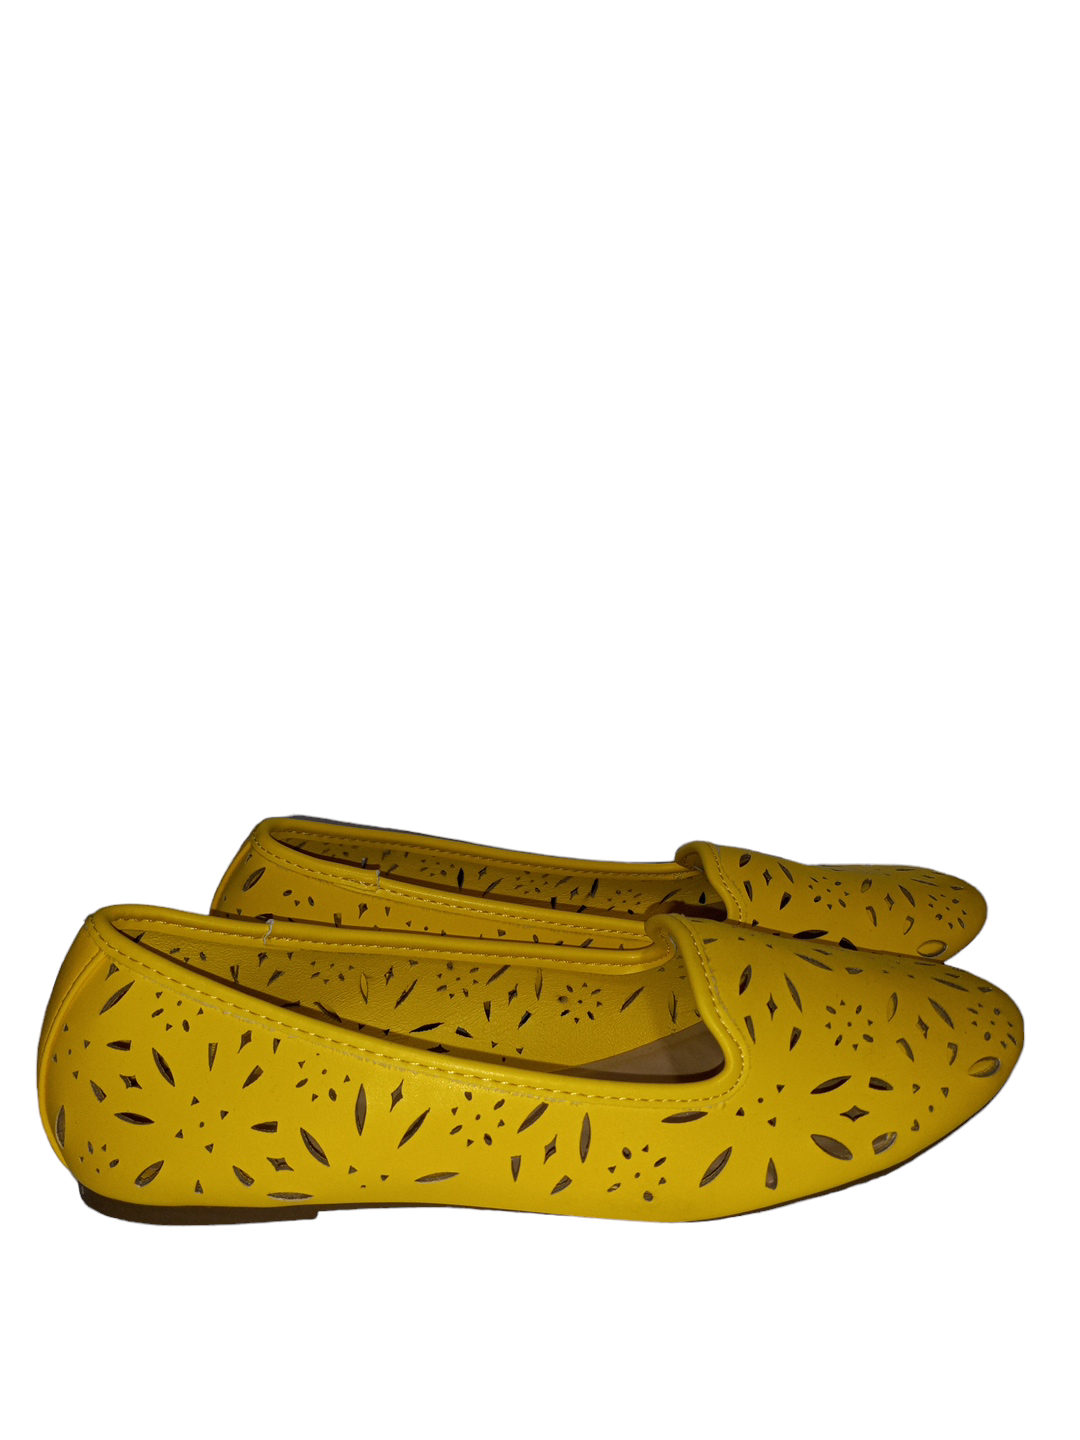 Yellow Shoes Flats Cato, Size 7